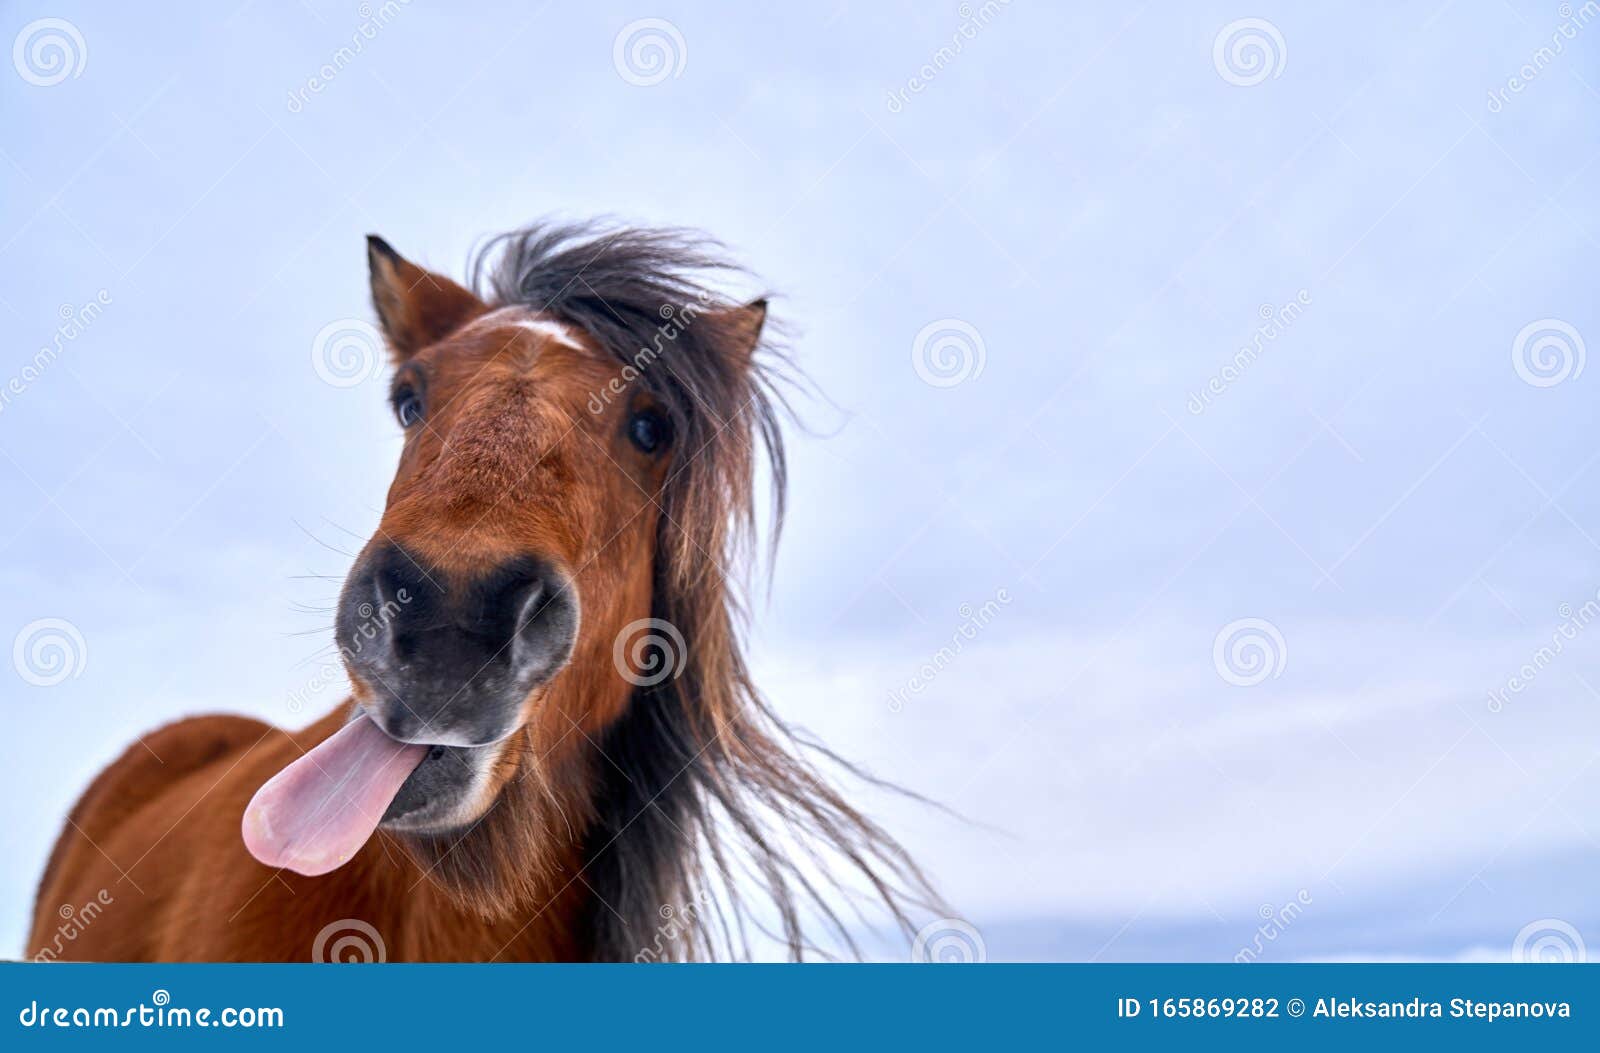 a horse with its tongue sticking out of its mouth